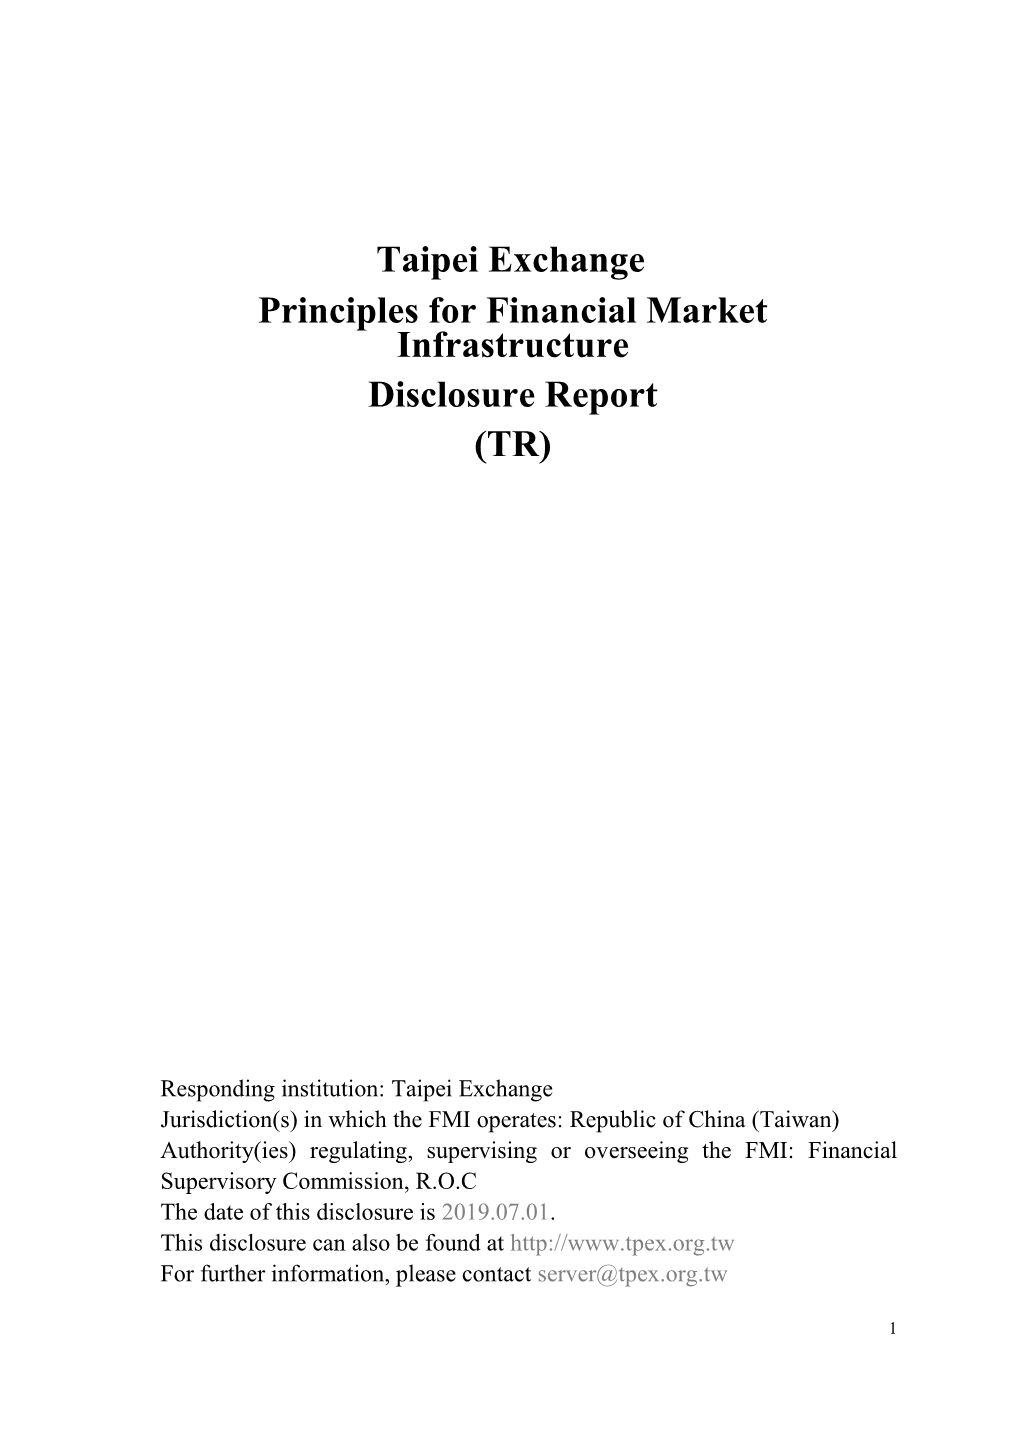 Taipei Exchange Principles for Financial Market Infrastructure Disclosure Report (TR)